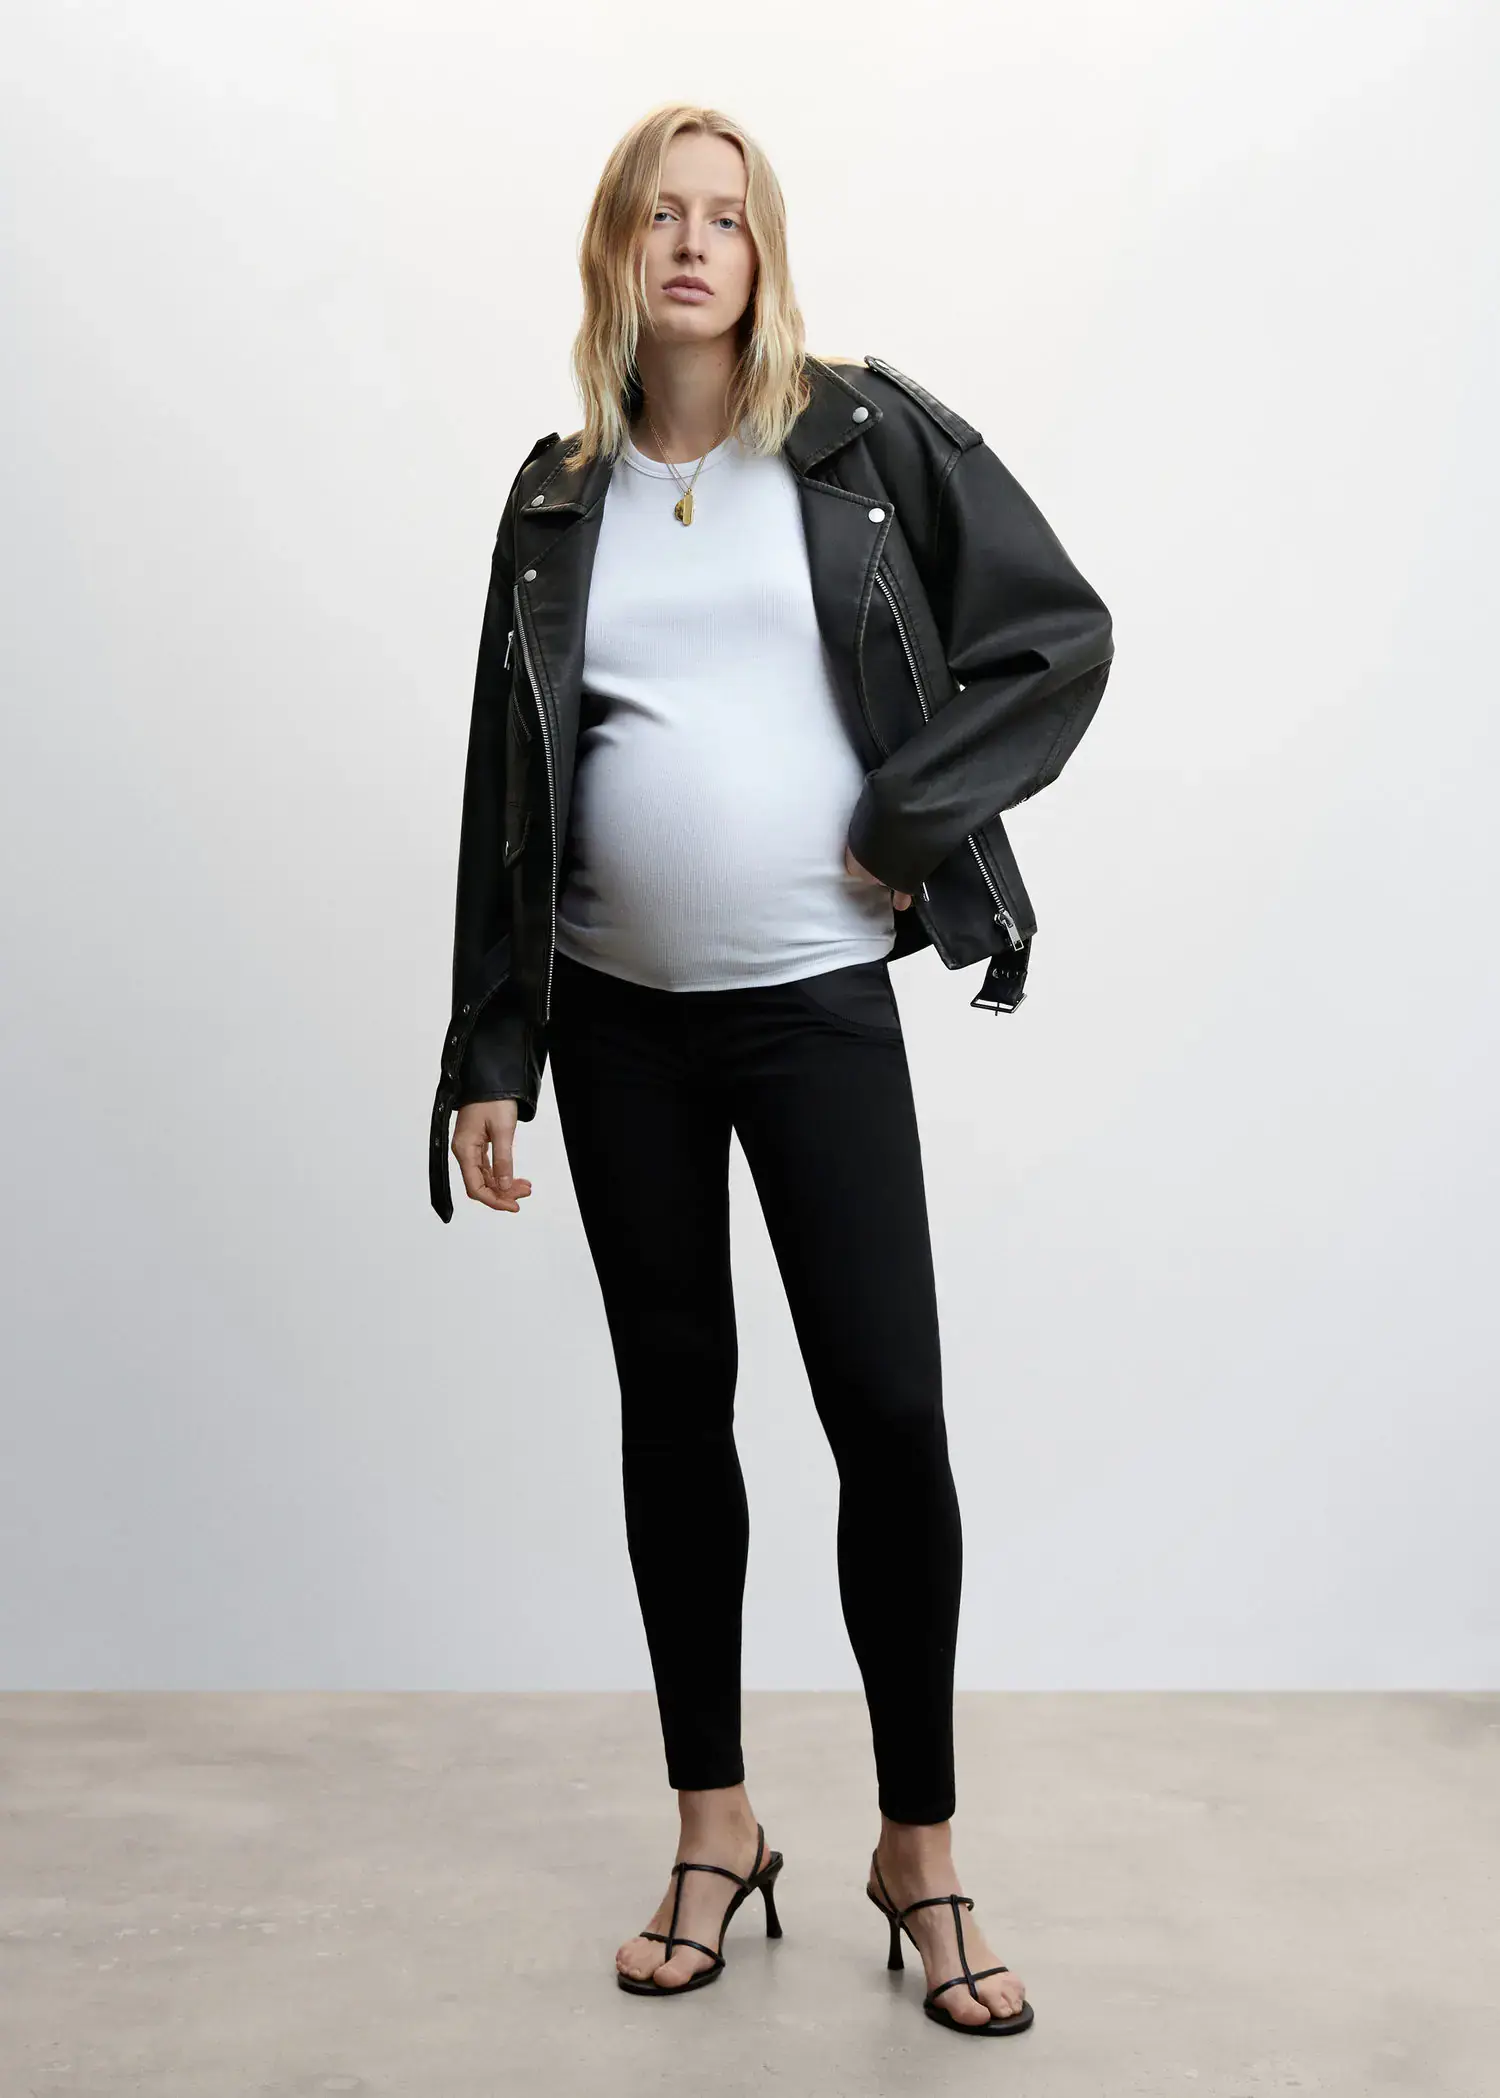 Mango Maternity skinny jeans. a pregnant woman wearing a black jacket and black pants. 